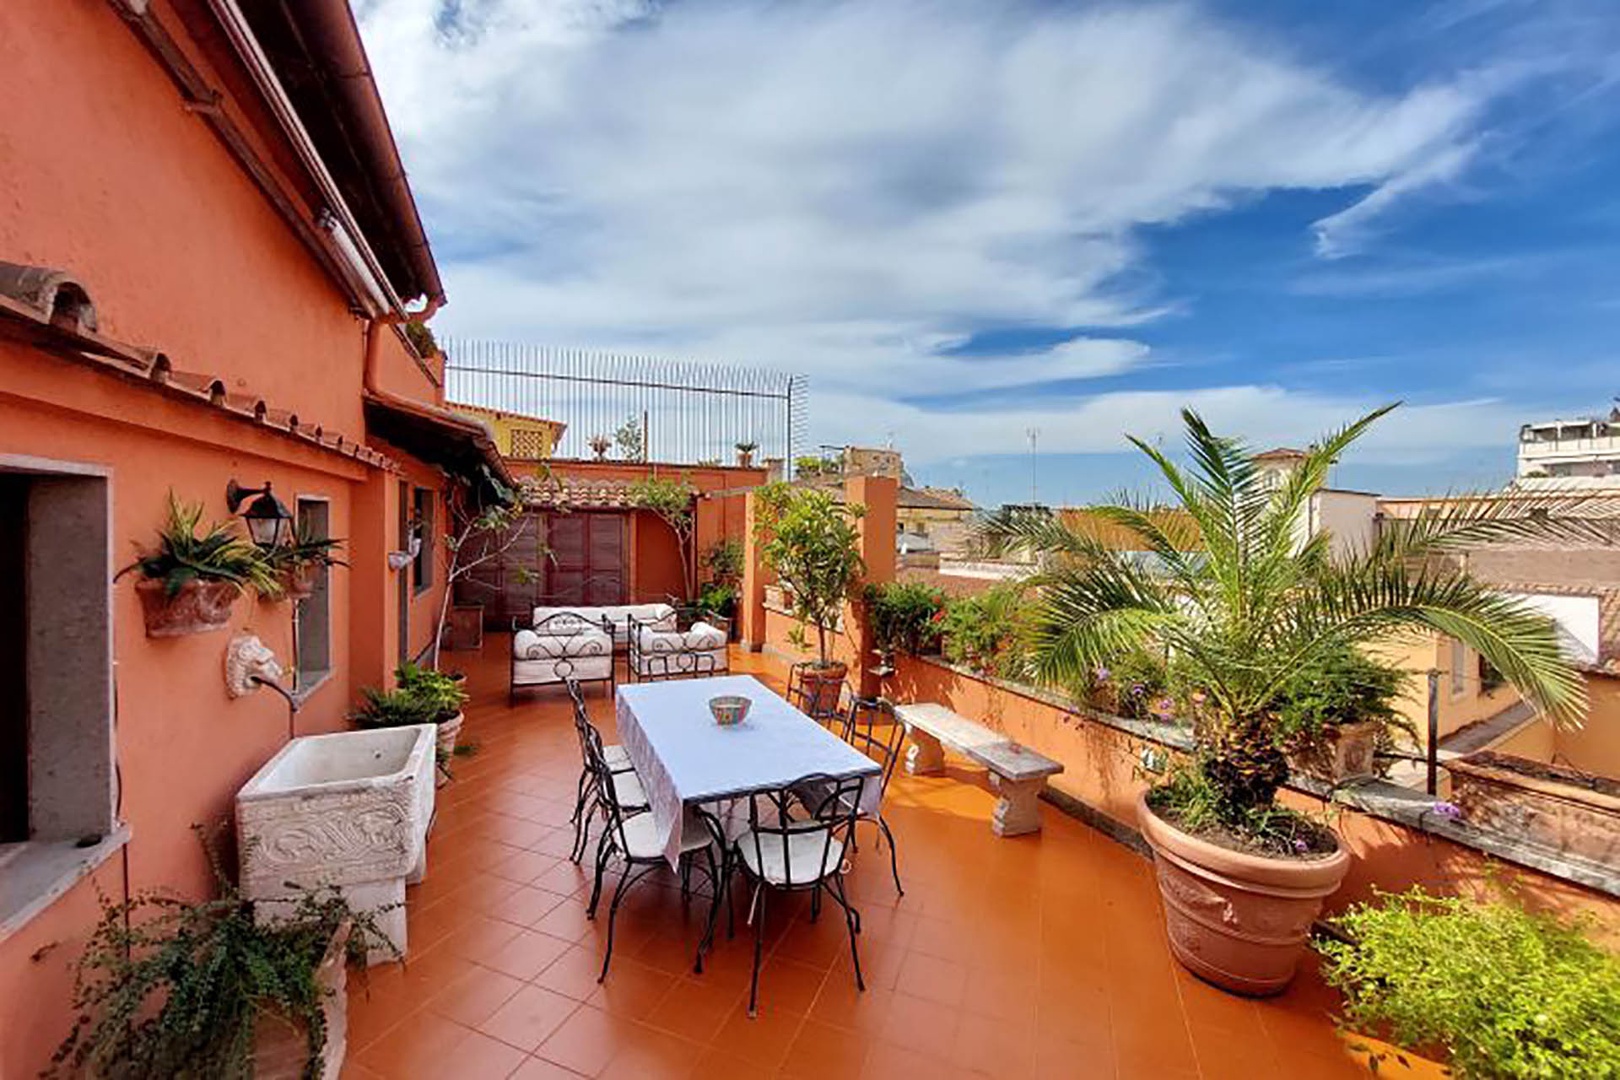 Dine al fresco on the expansive terrace overlooking the rooftops of Rome.